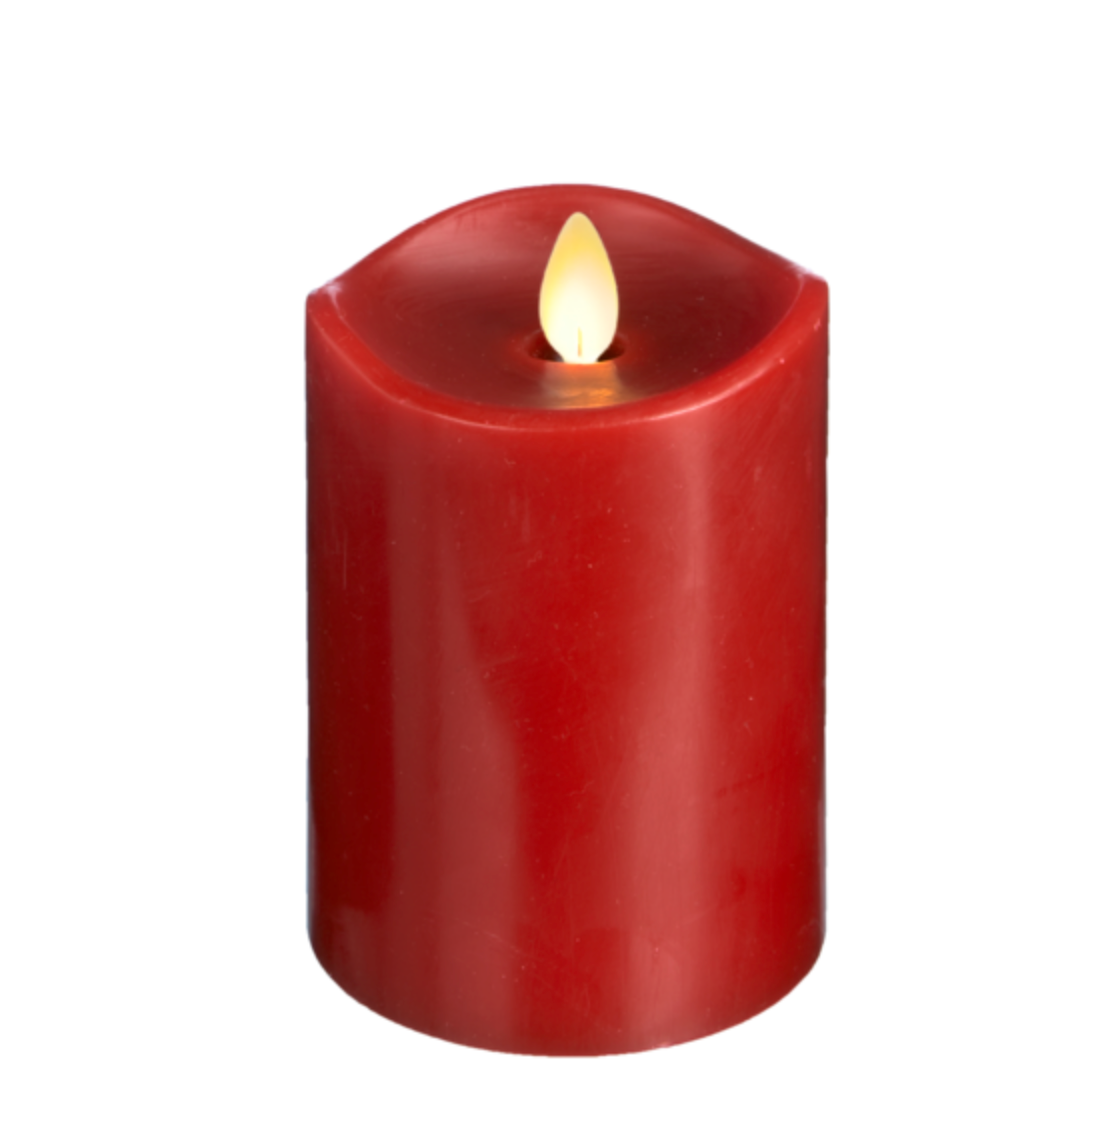 3x5 red battery operated led candle